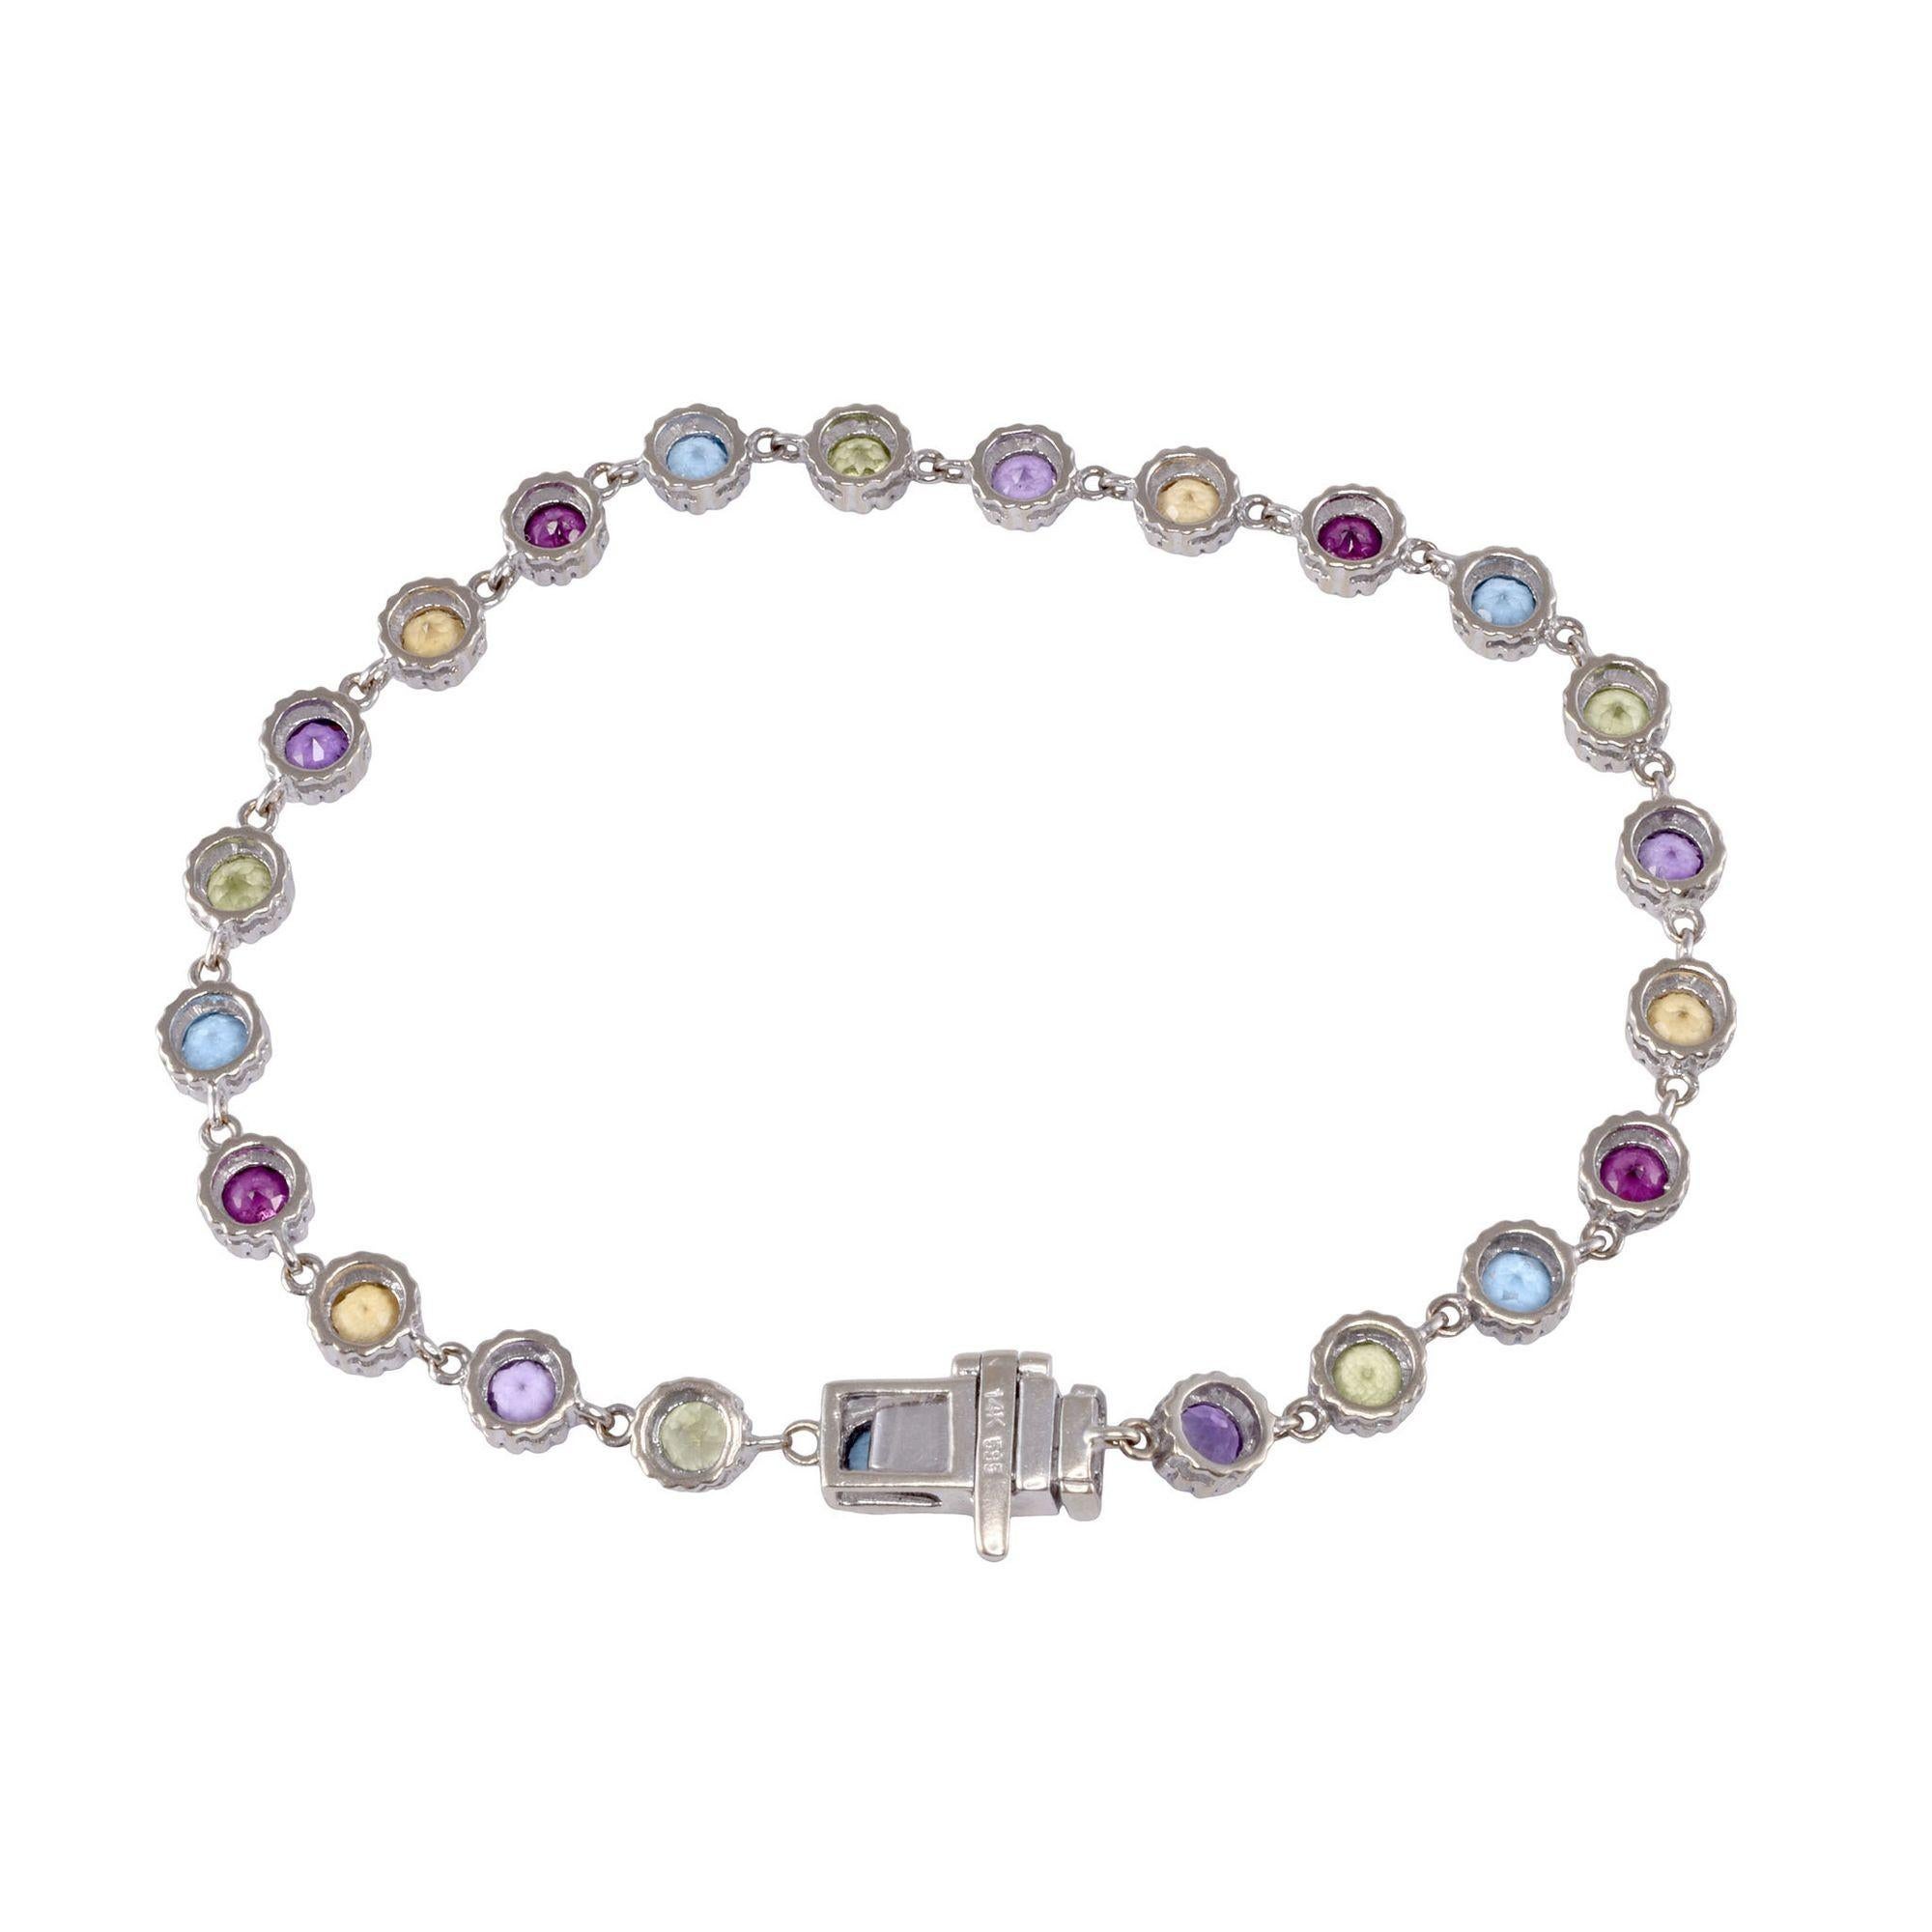 Estate round multi gemstone link bracelet. This 14 karat gold link bracelet features round gemstones including garnet, amethyst, peridot, citrine, and blue topaz. The bracelet also has a safety catch on the clasp. [KIMH 2144 P]